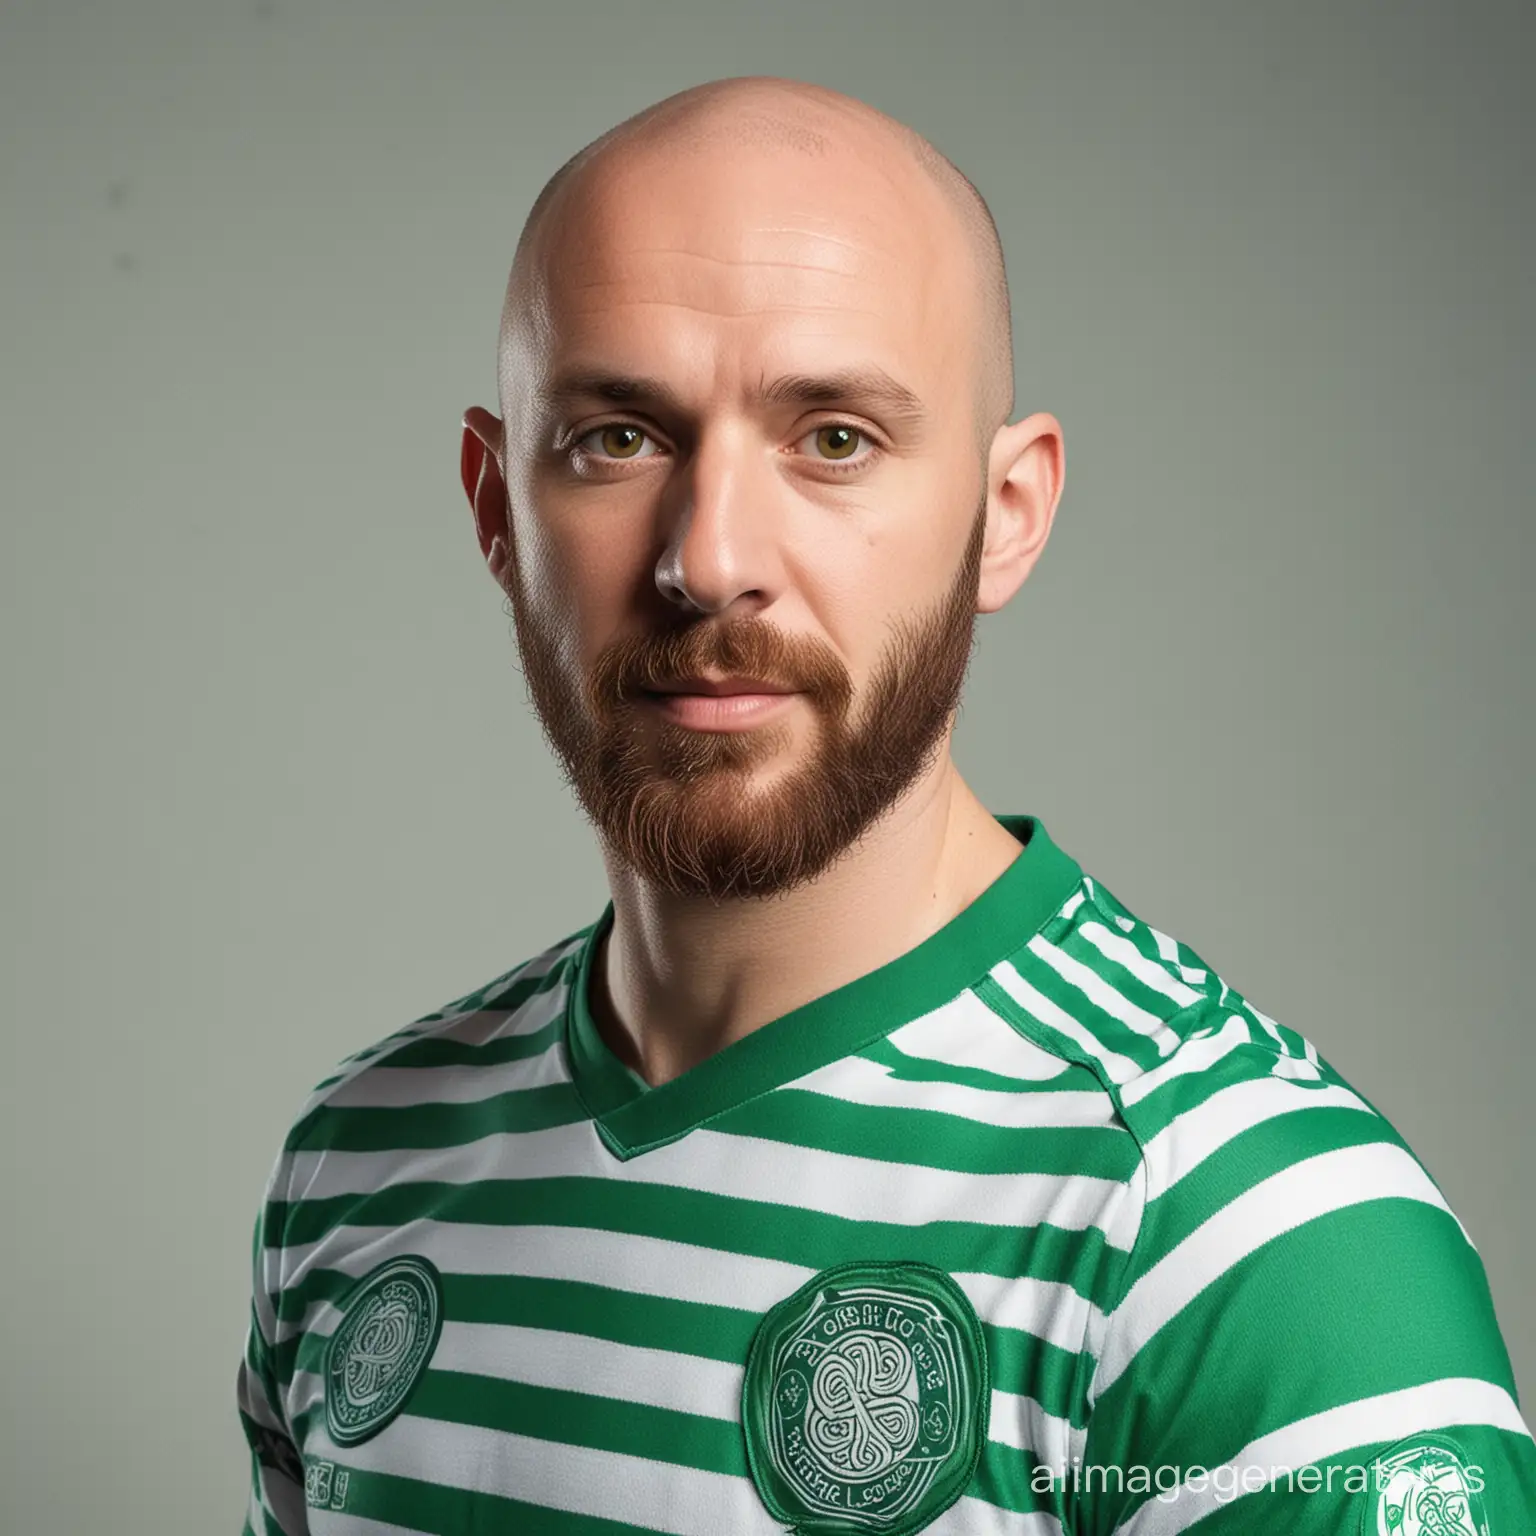 Bald man with short beard with a Celtic football jersey